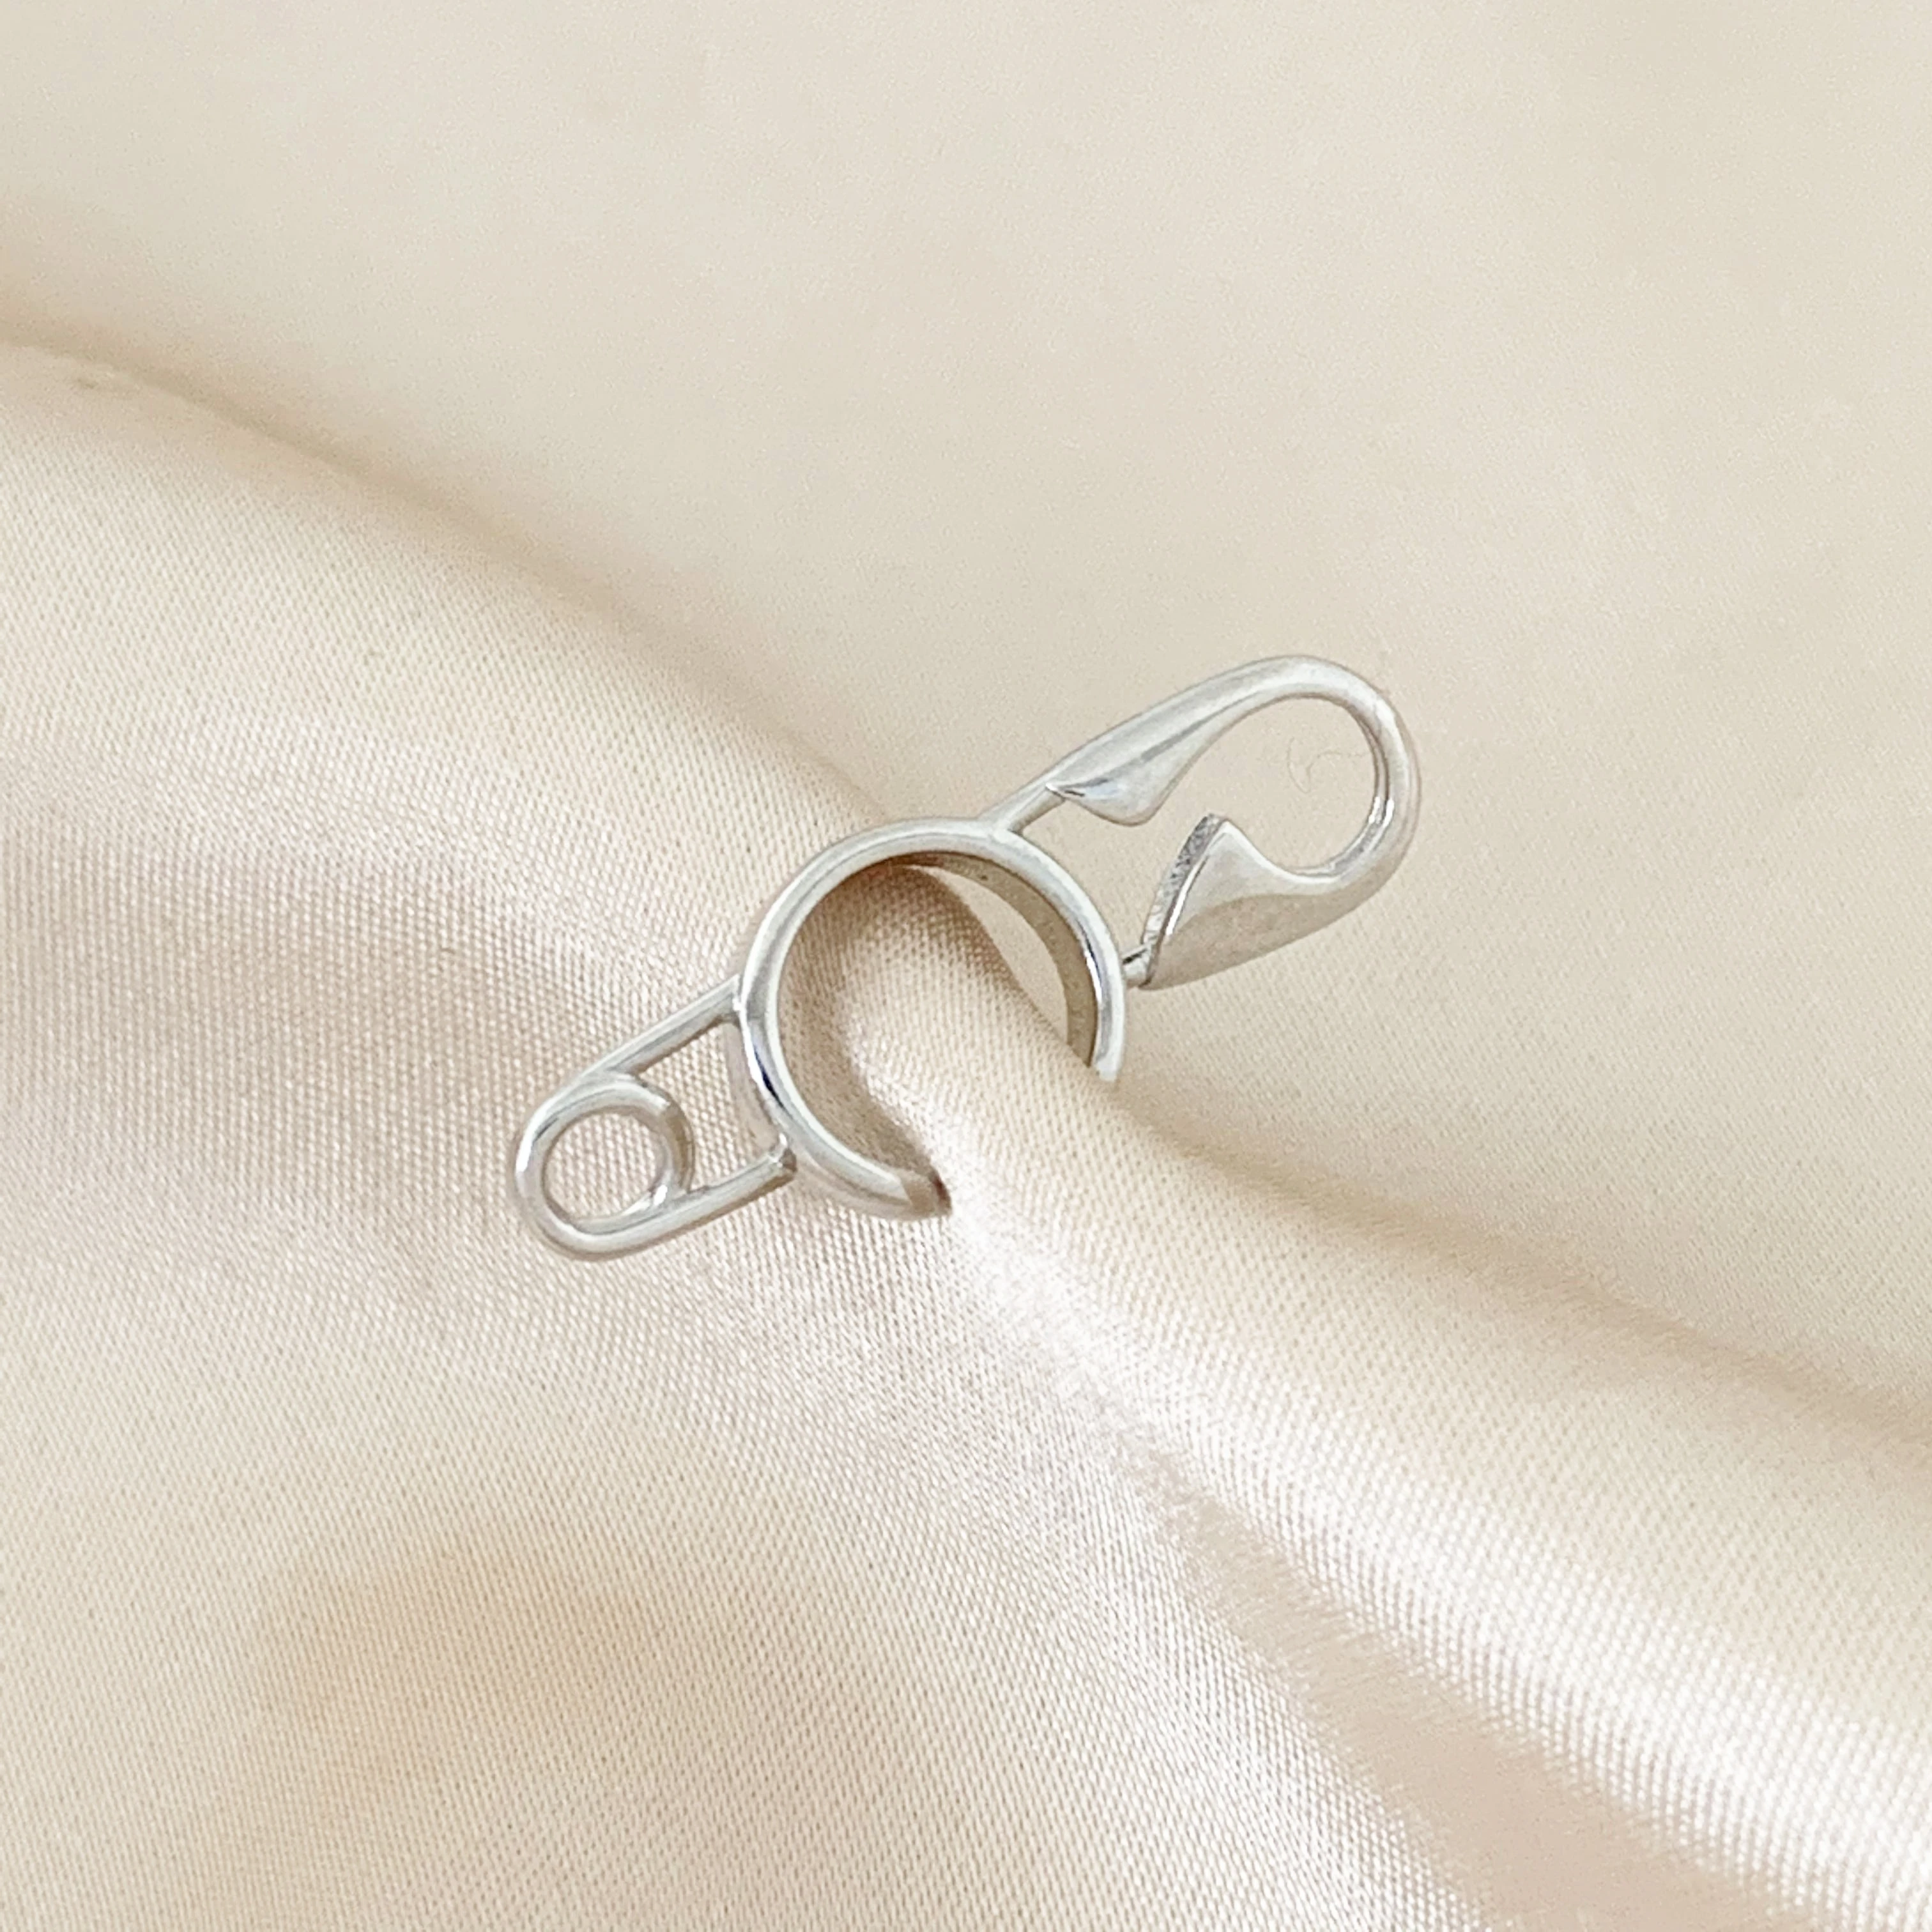 Eico Gold Nose Ring  Without Perforation Nose Sleeve Paper Clip Creative Nose Ring Non Piercing Body Jewelry